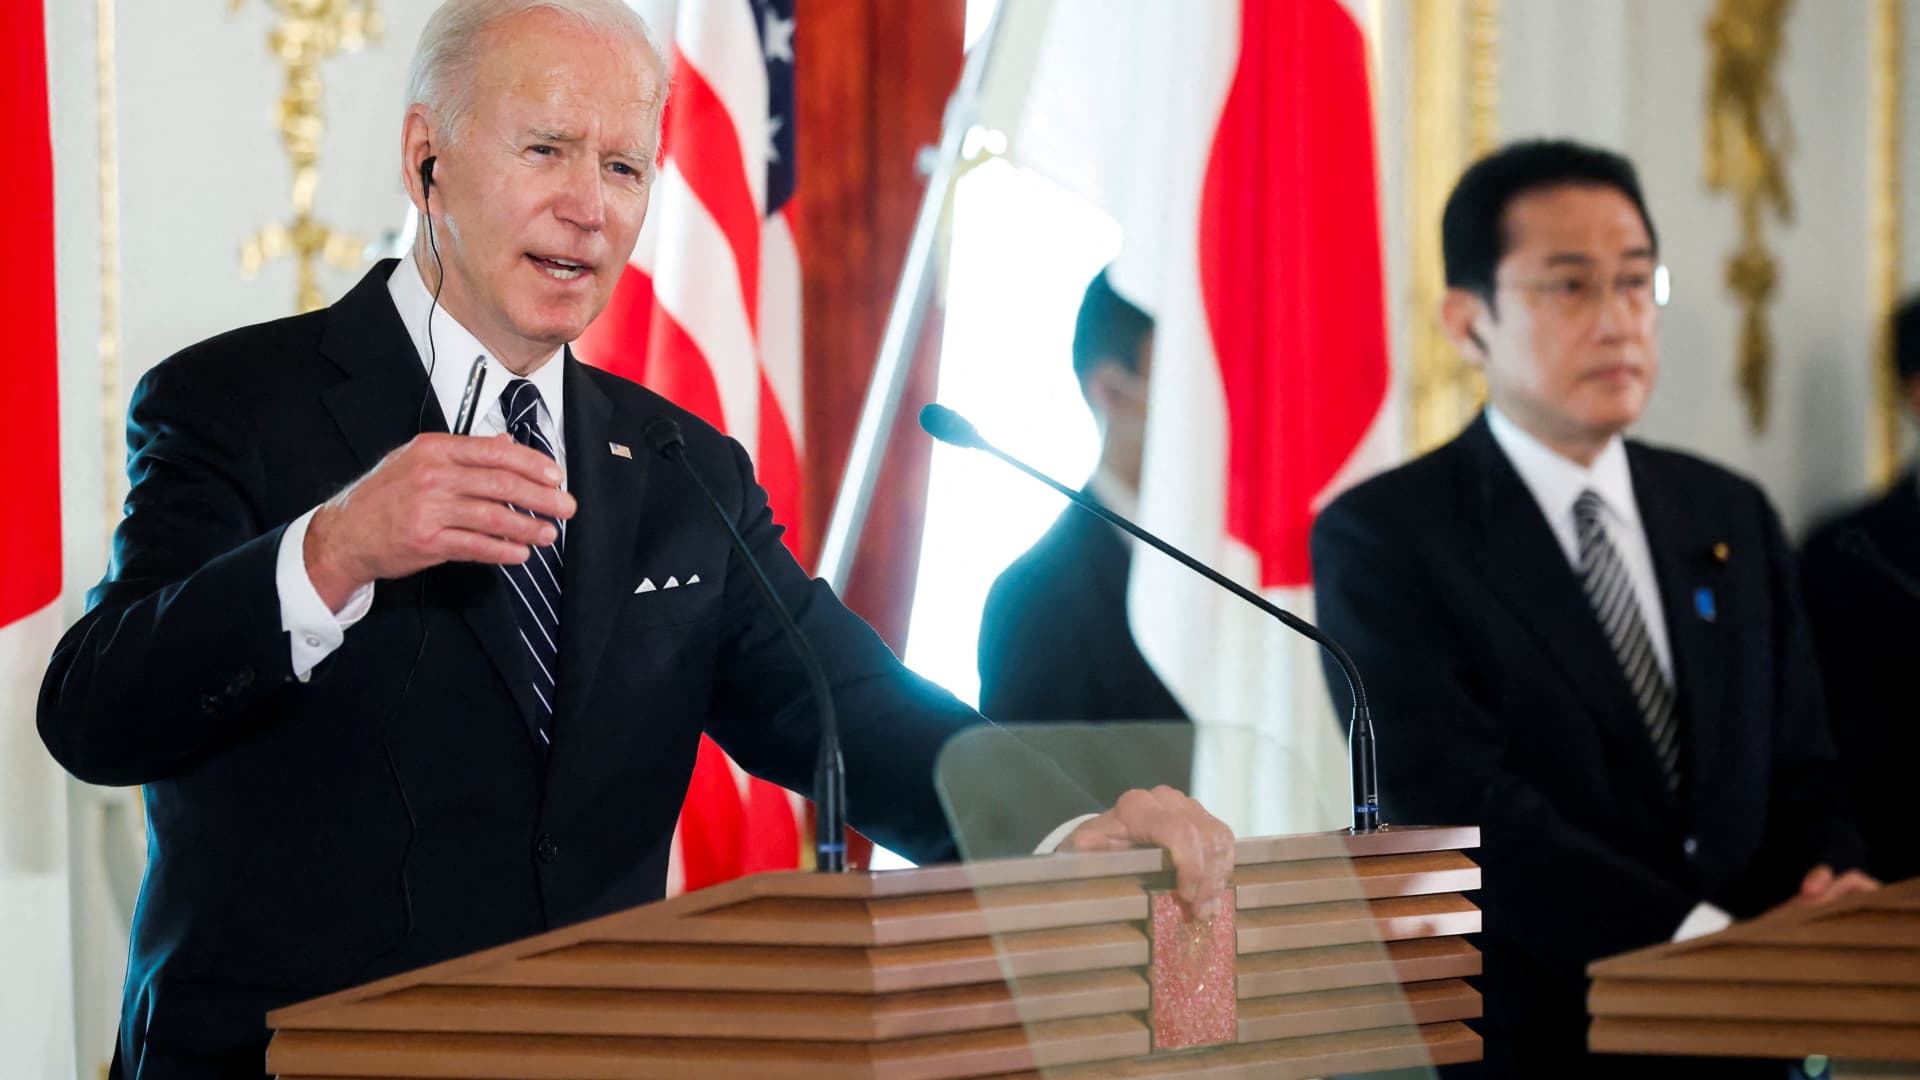 Biden says his Taiwan comments don’t reflect a change in U.S. policy after drawing ire from China